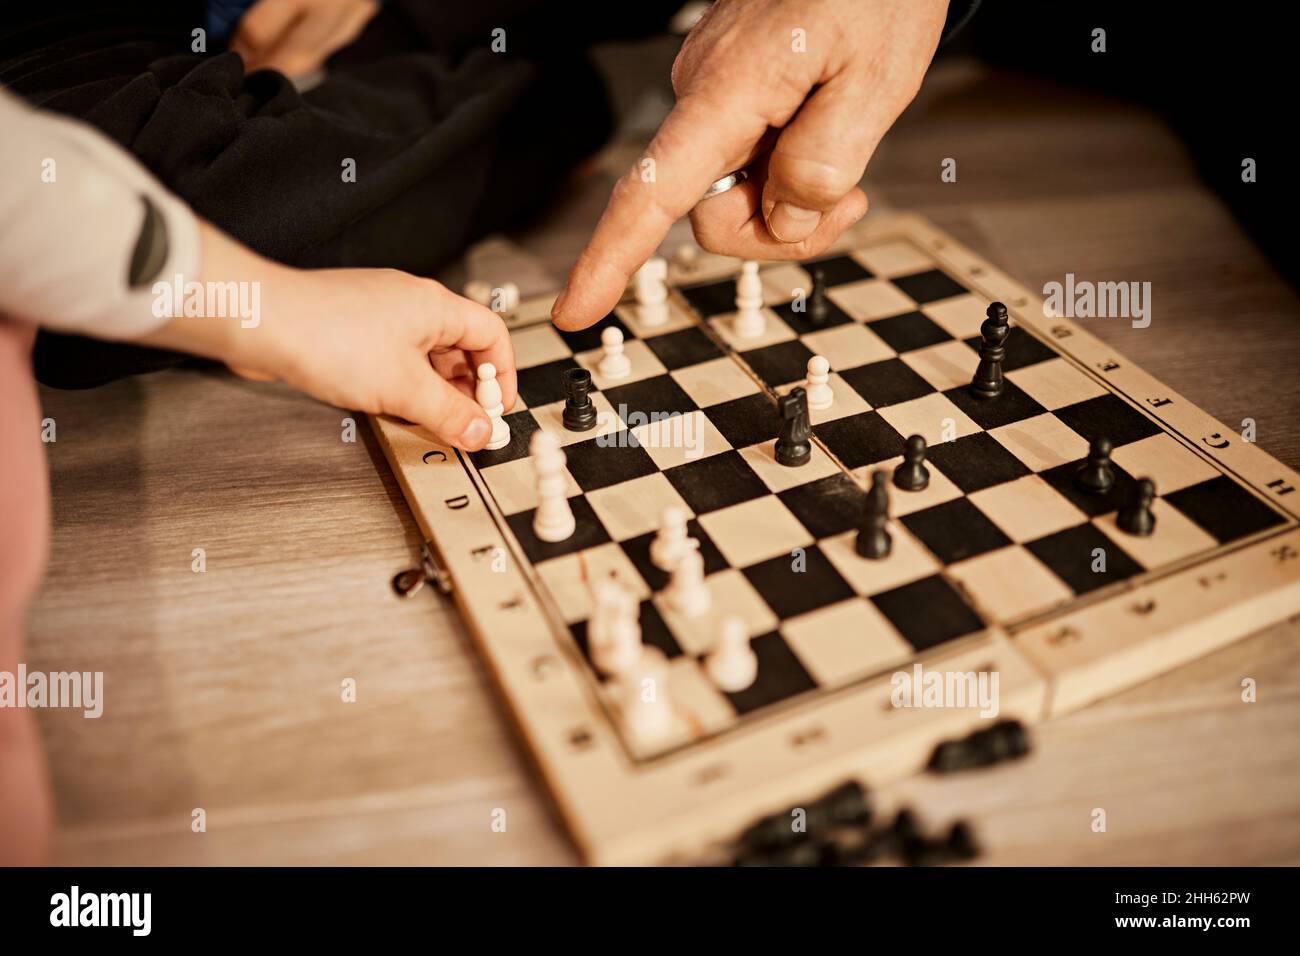 Grandfather pointing at girl holding chess piece Stock Photo